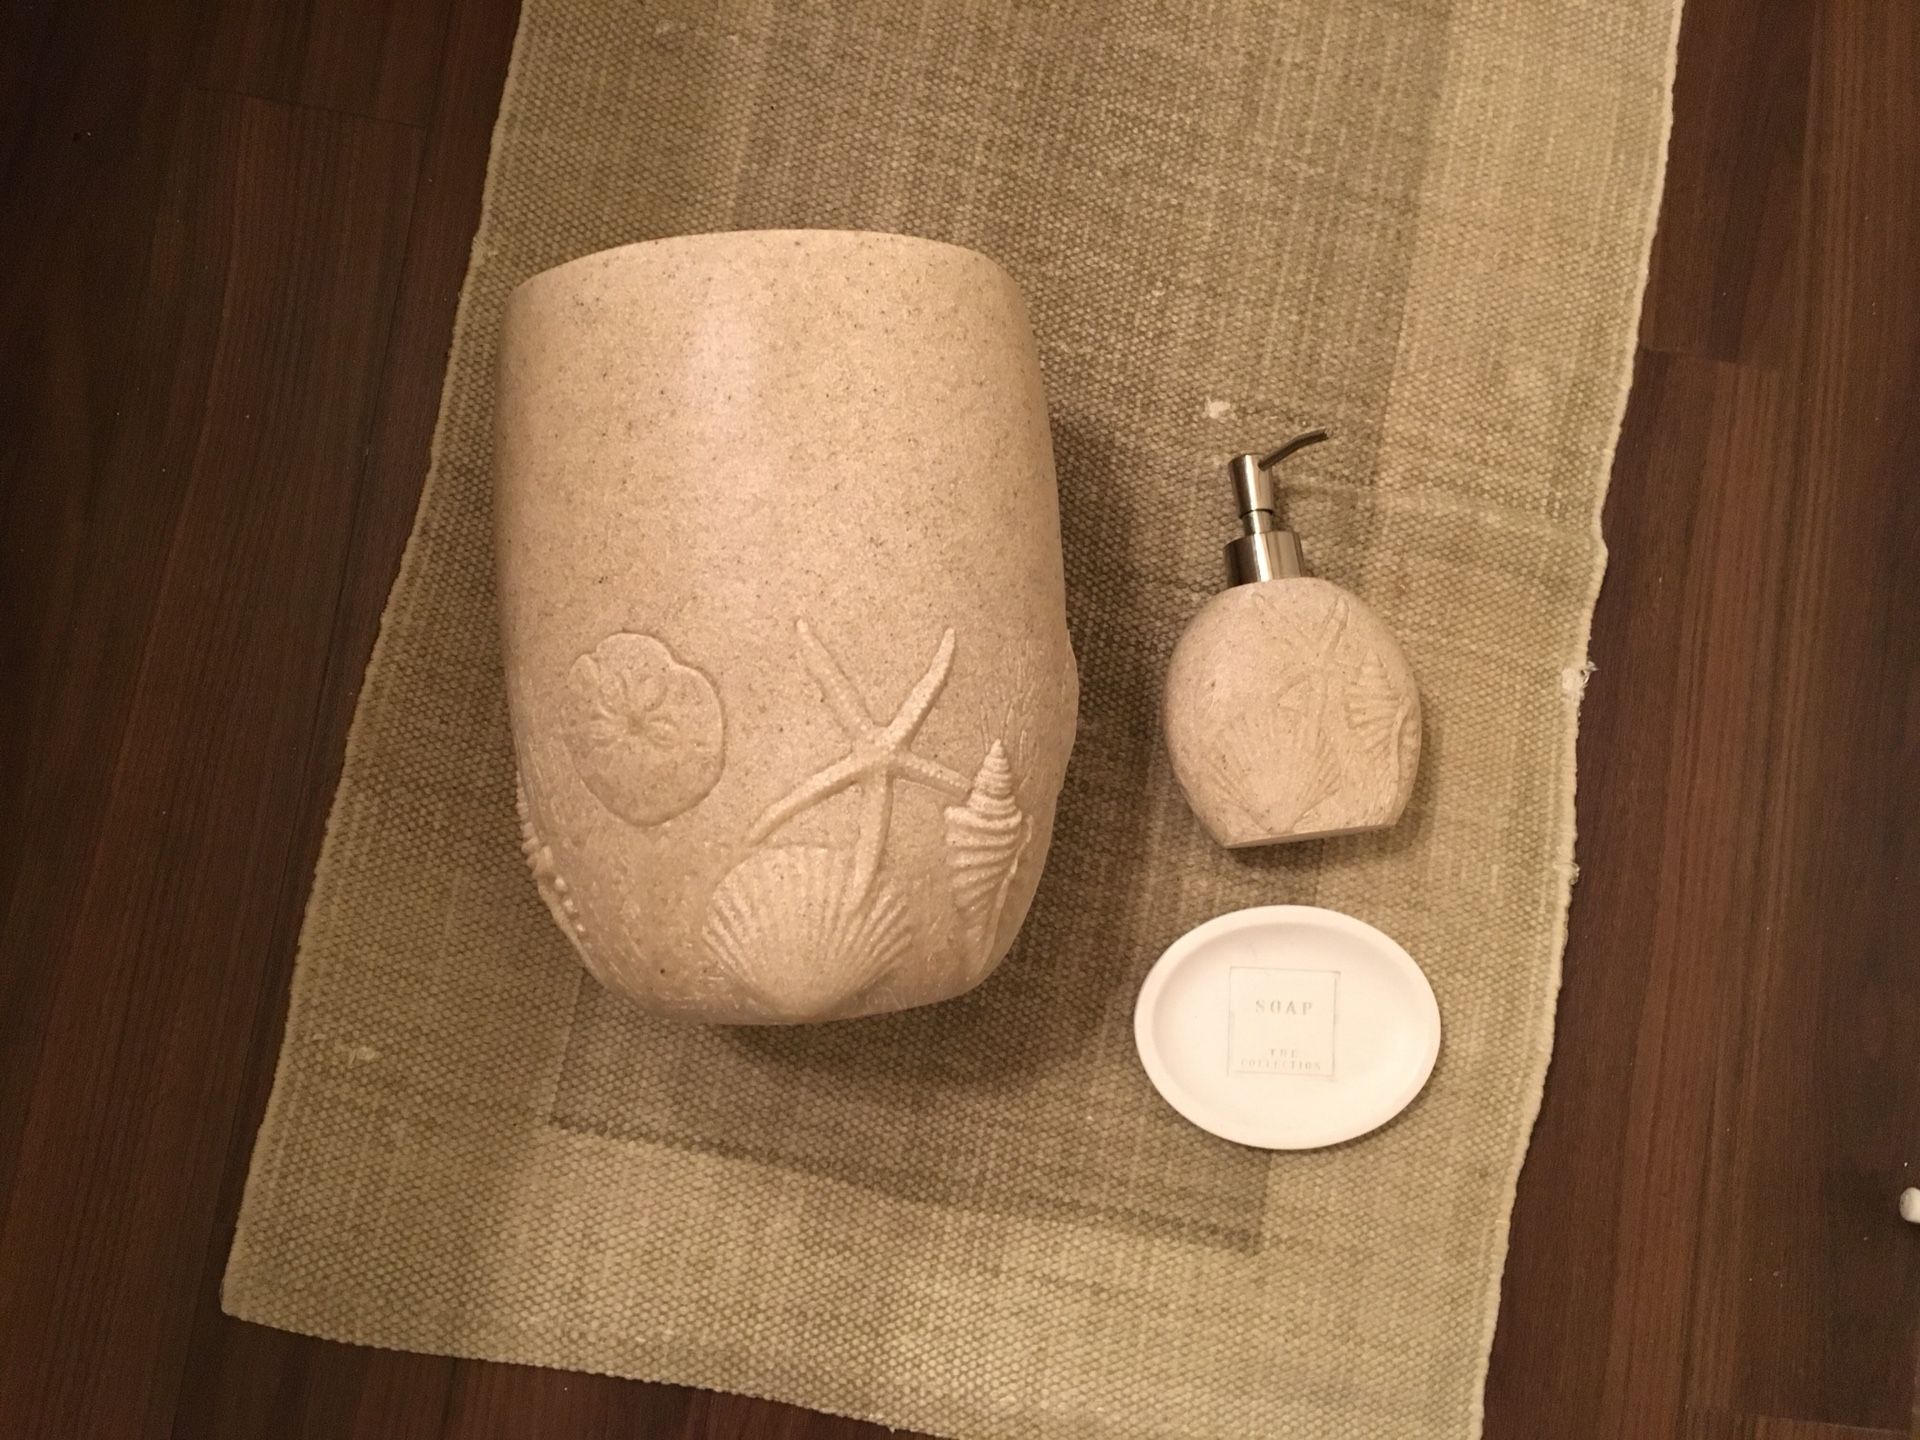 Bed Bath and Beyond Seashell bathroom set and two matching floor mats